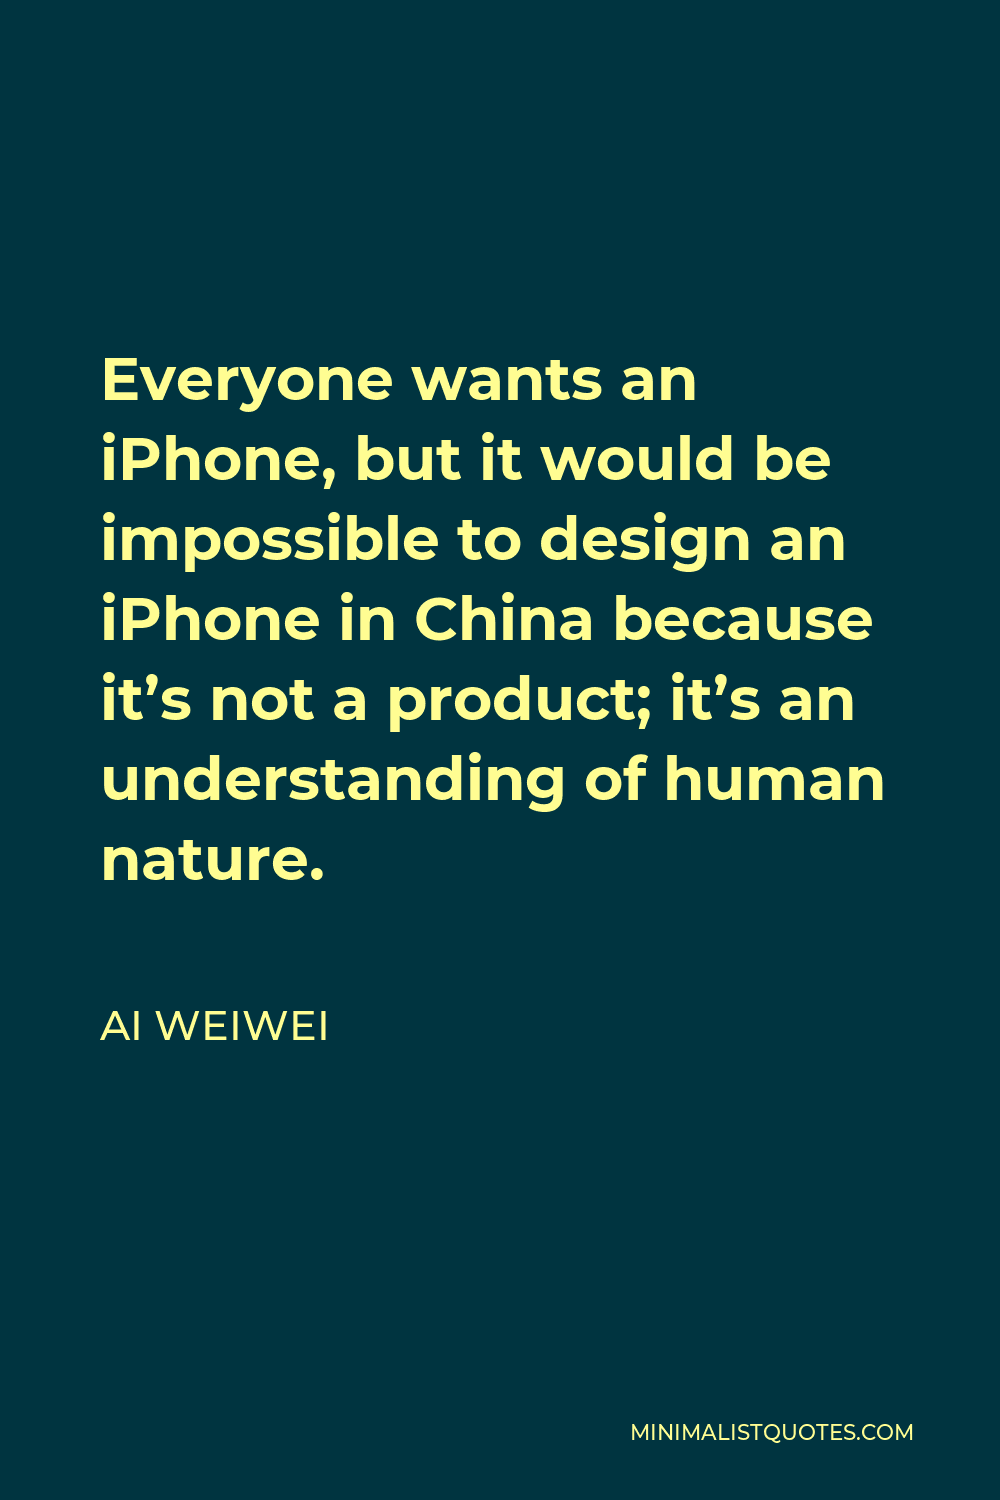 Ai Weiwei Quote - Everyone wants an iPhone, but it would be impossible to design an iPhone in China because it’s not a product; it’s an understanding of human nature.